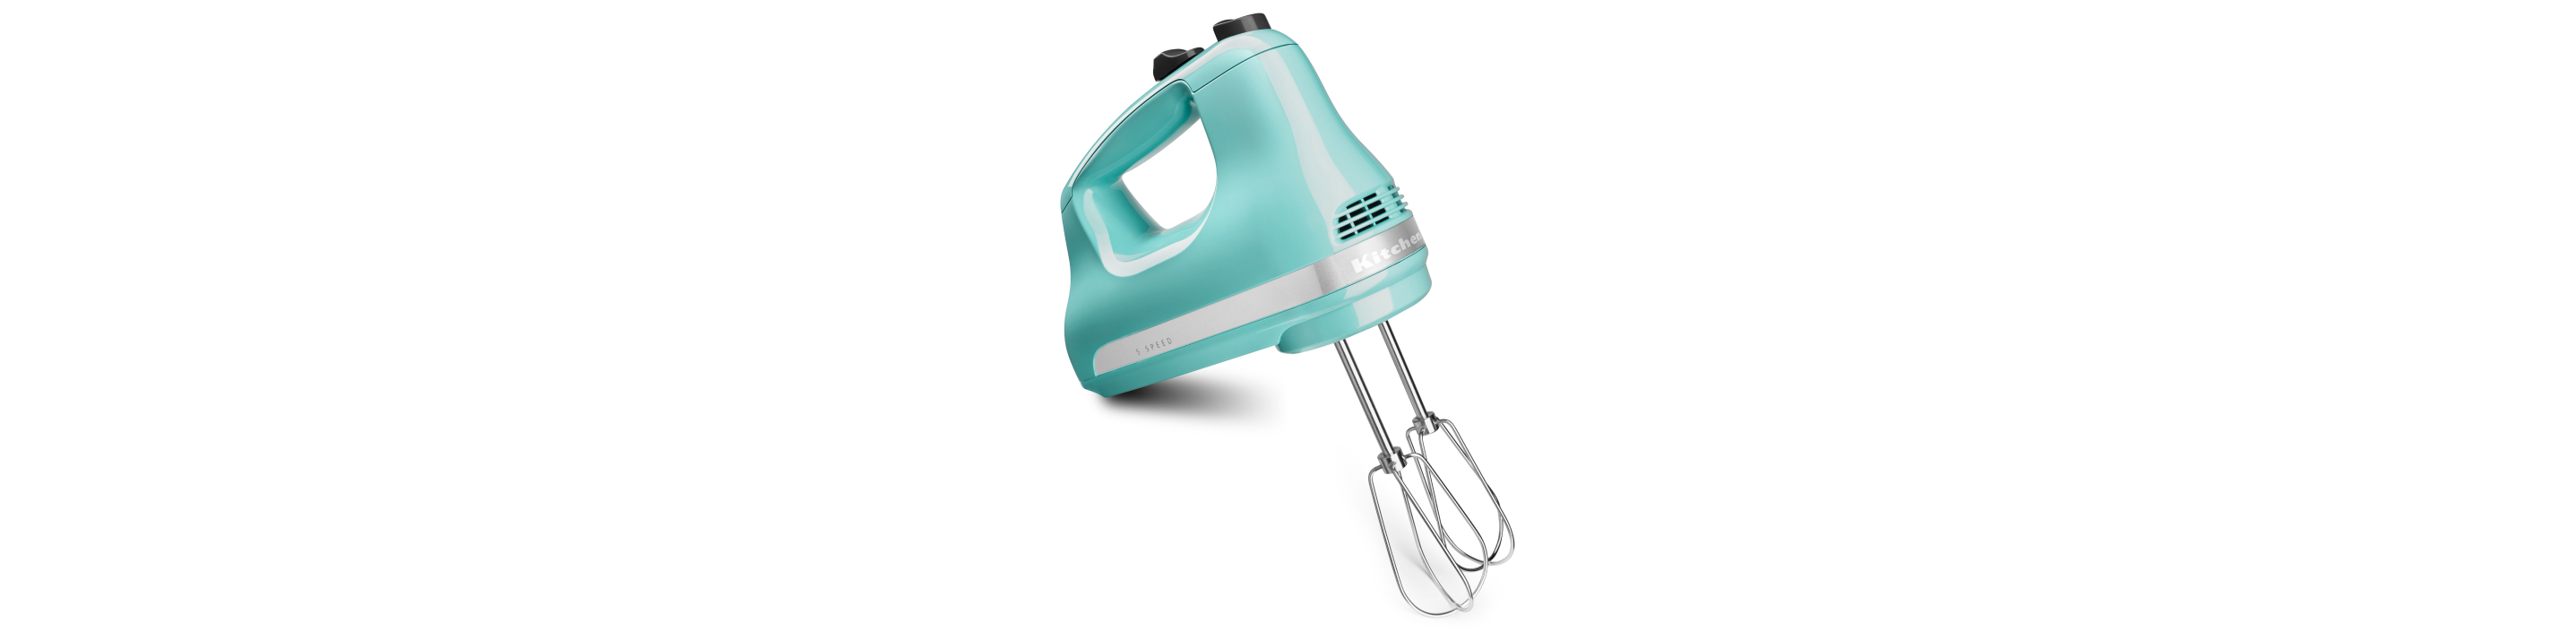 Best hand mixer with paddle attachment - Jody's Bakery